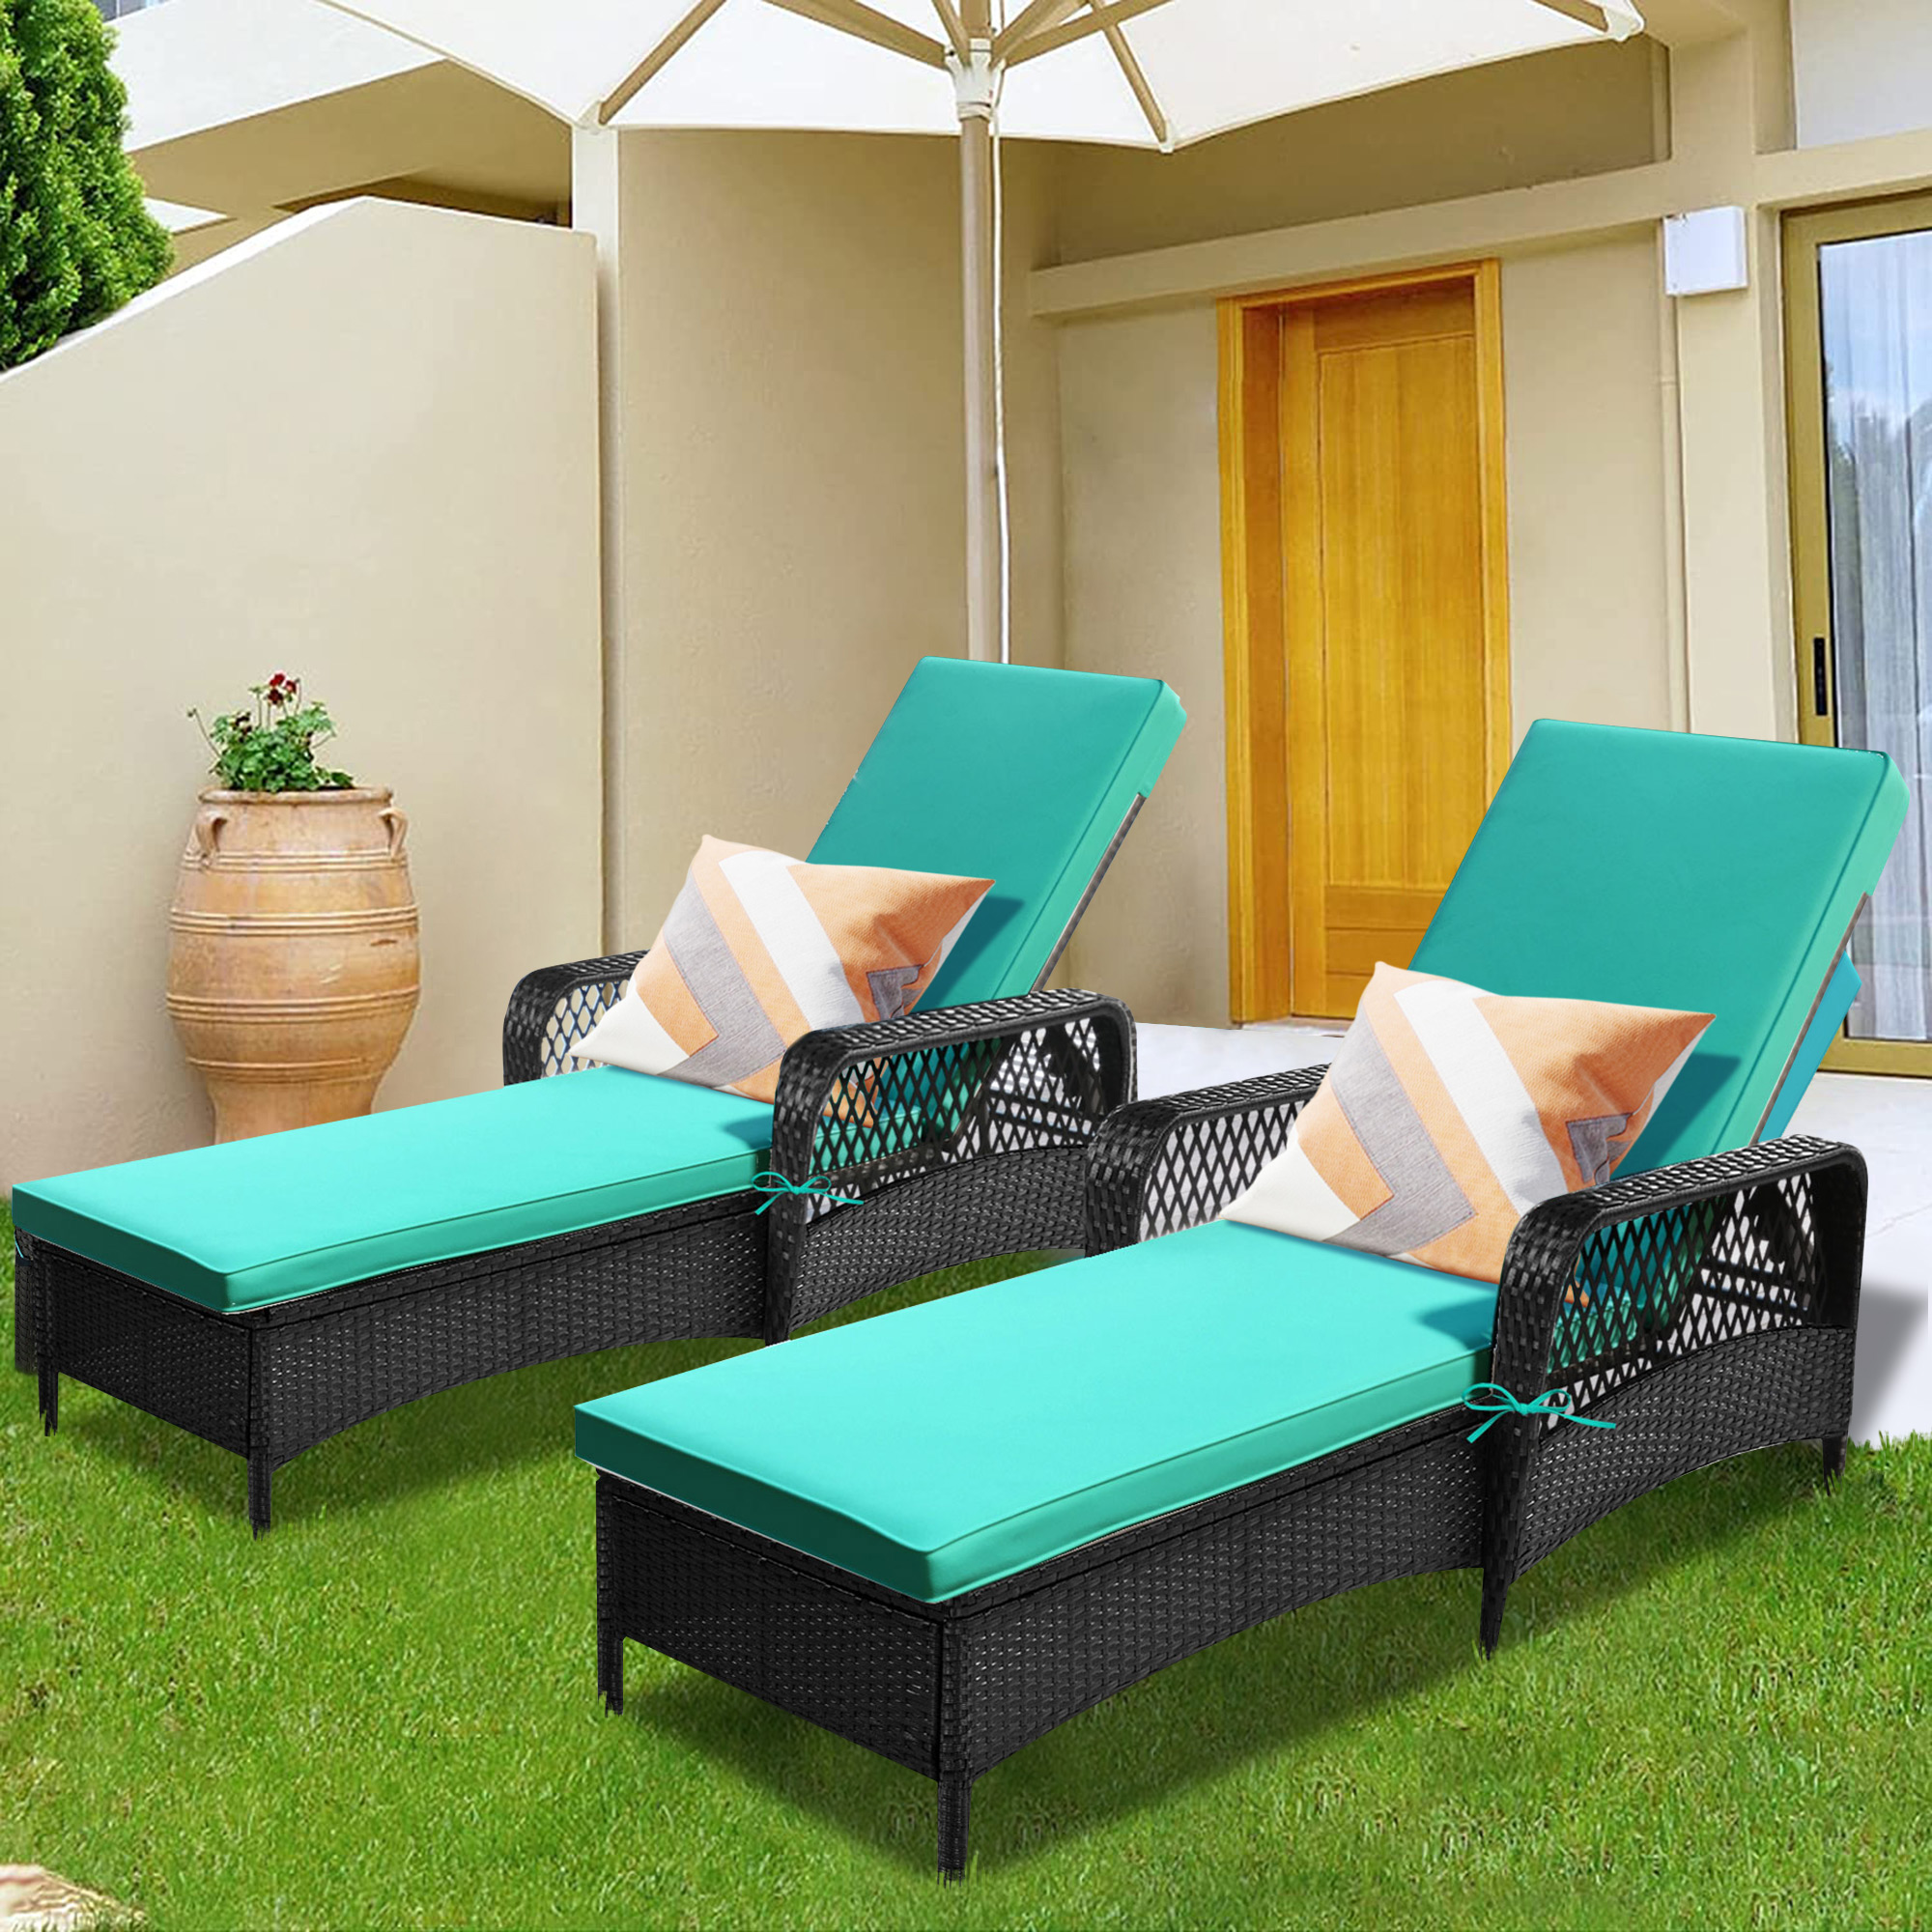 SYNGAR Outdoor Chaise Lounge Chairs, Patio Reclining Sun Lounger, PE Wicker Rattan Adjustable Lounge Chair with Thickened Cushion, Reclining Chair for Poolside, Deck, Backyard, 2 Pack, Green - image 2 of 11